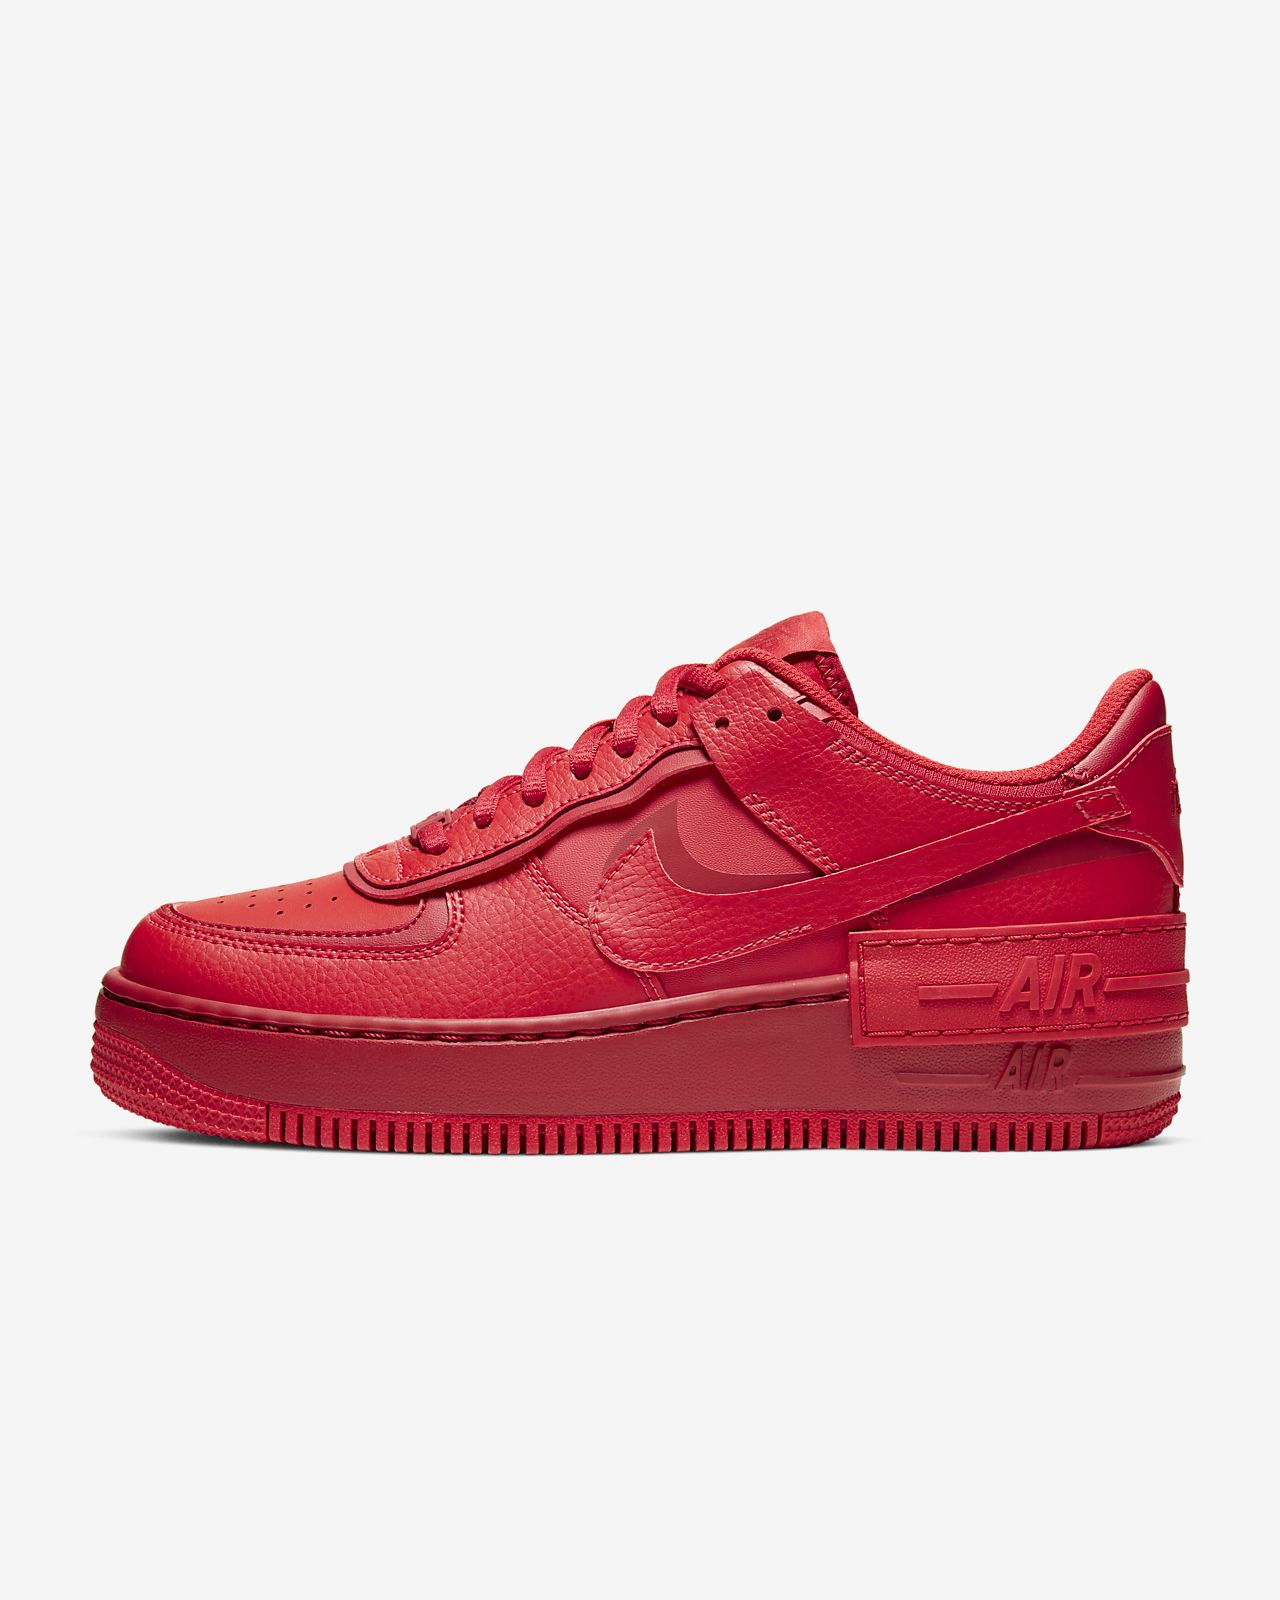 all red nike air force 1